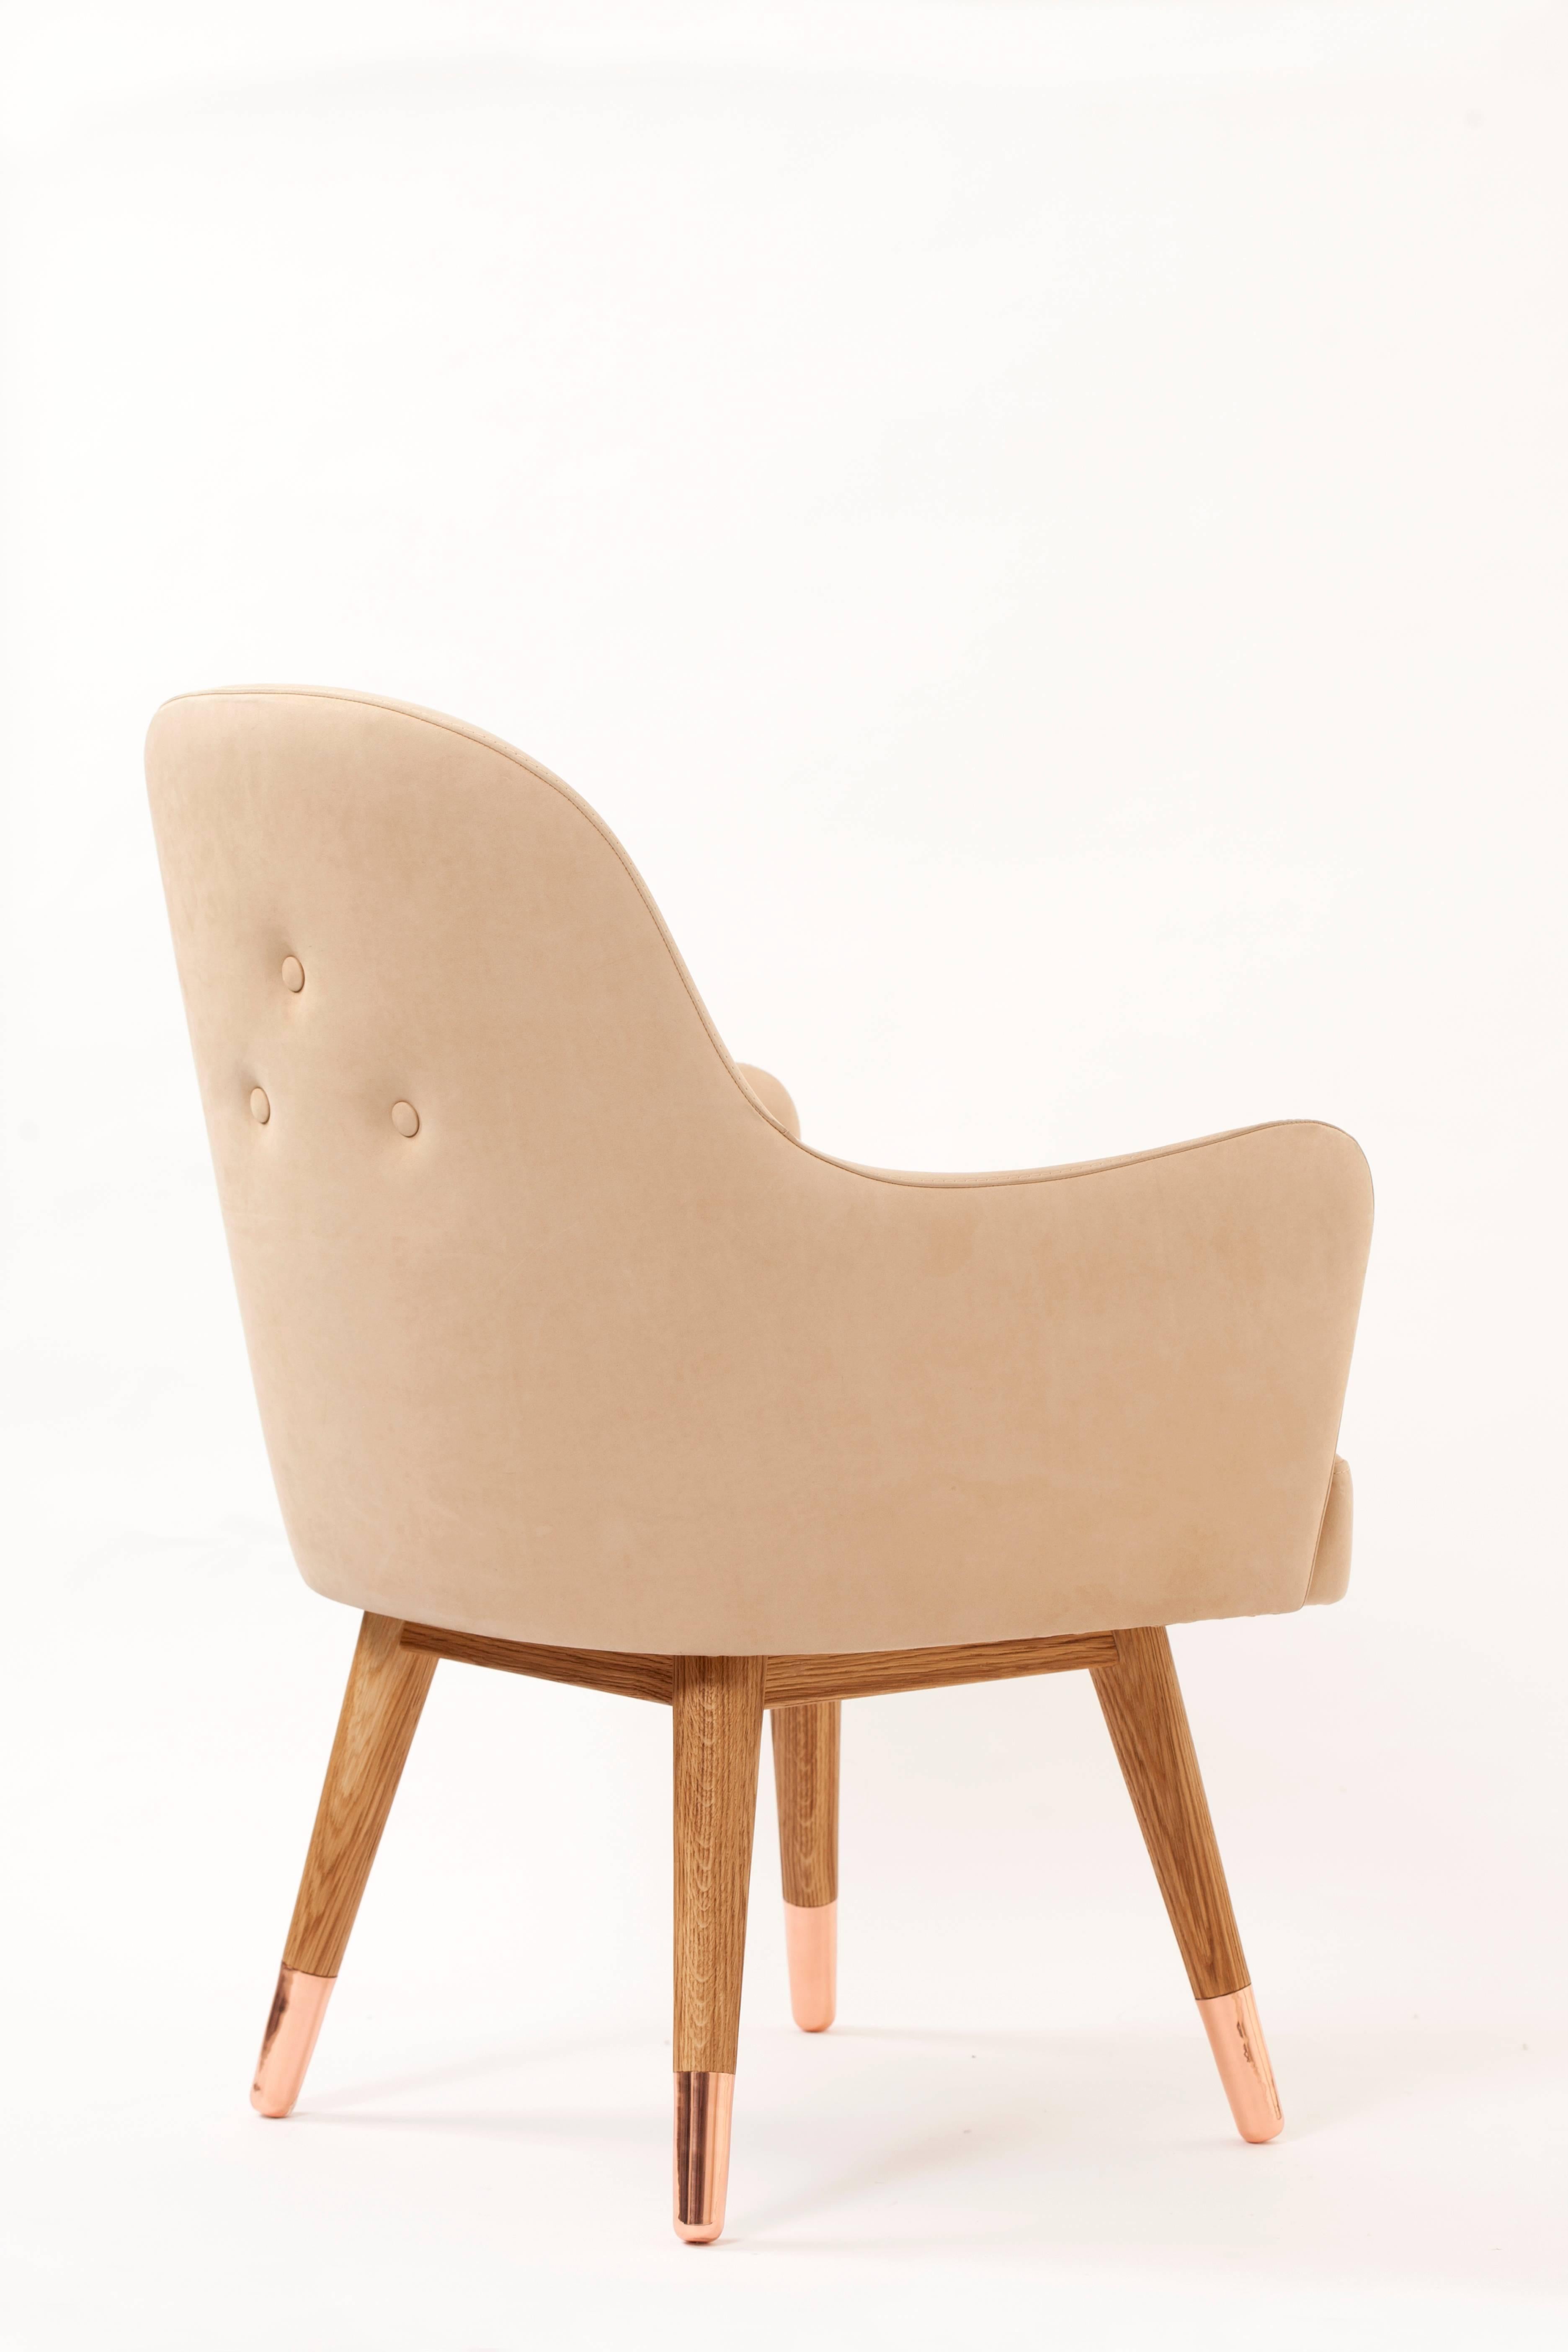 Contemporary Dandy Chair with Beige Suede Leather, Walnut and Brass 1